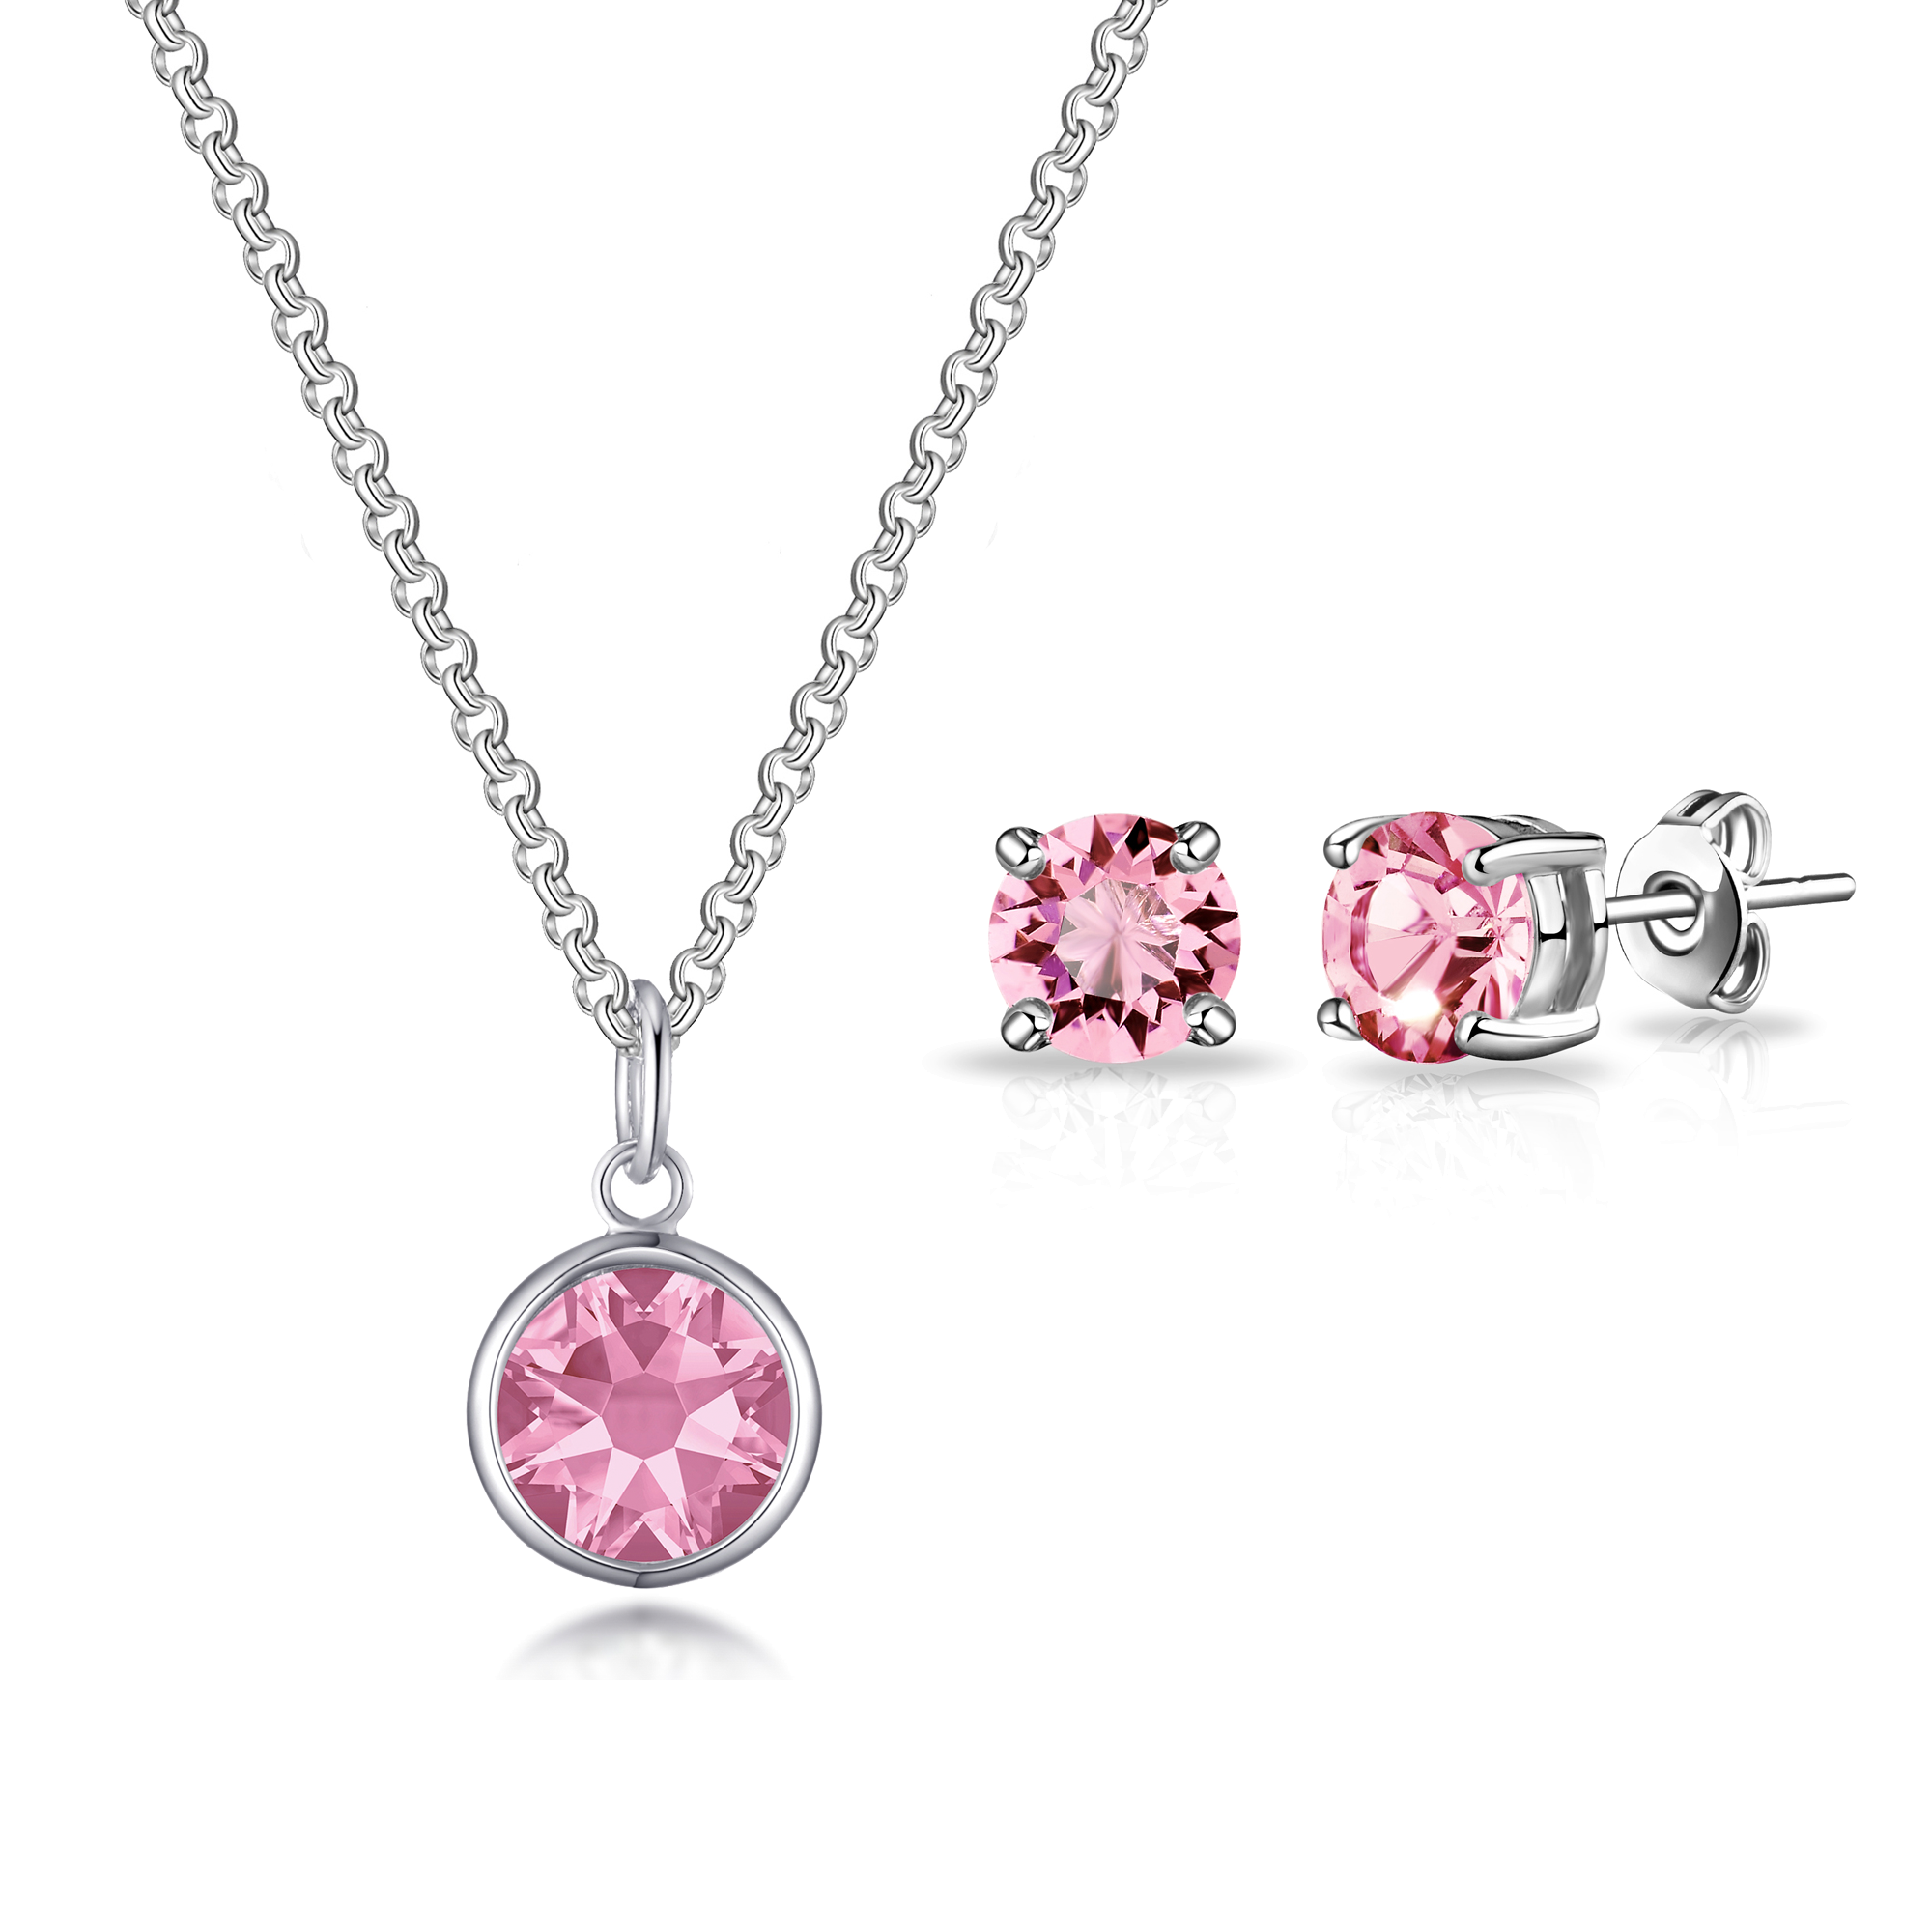 October (Tourmaline) Birthstone Necklace & Earrings Set Created with Zircondia® Crystals